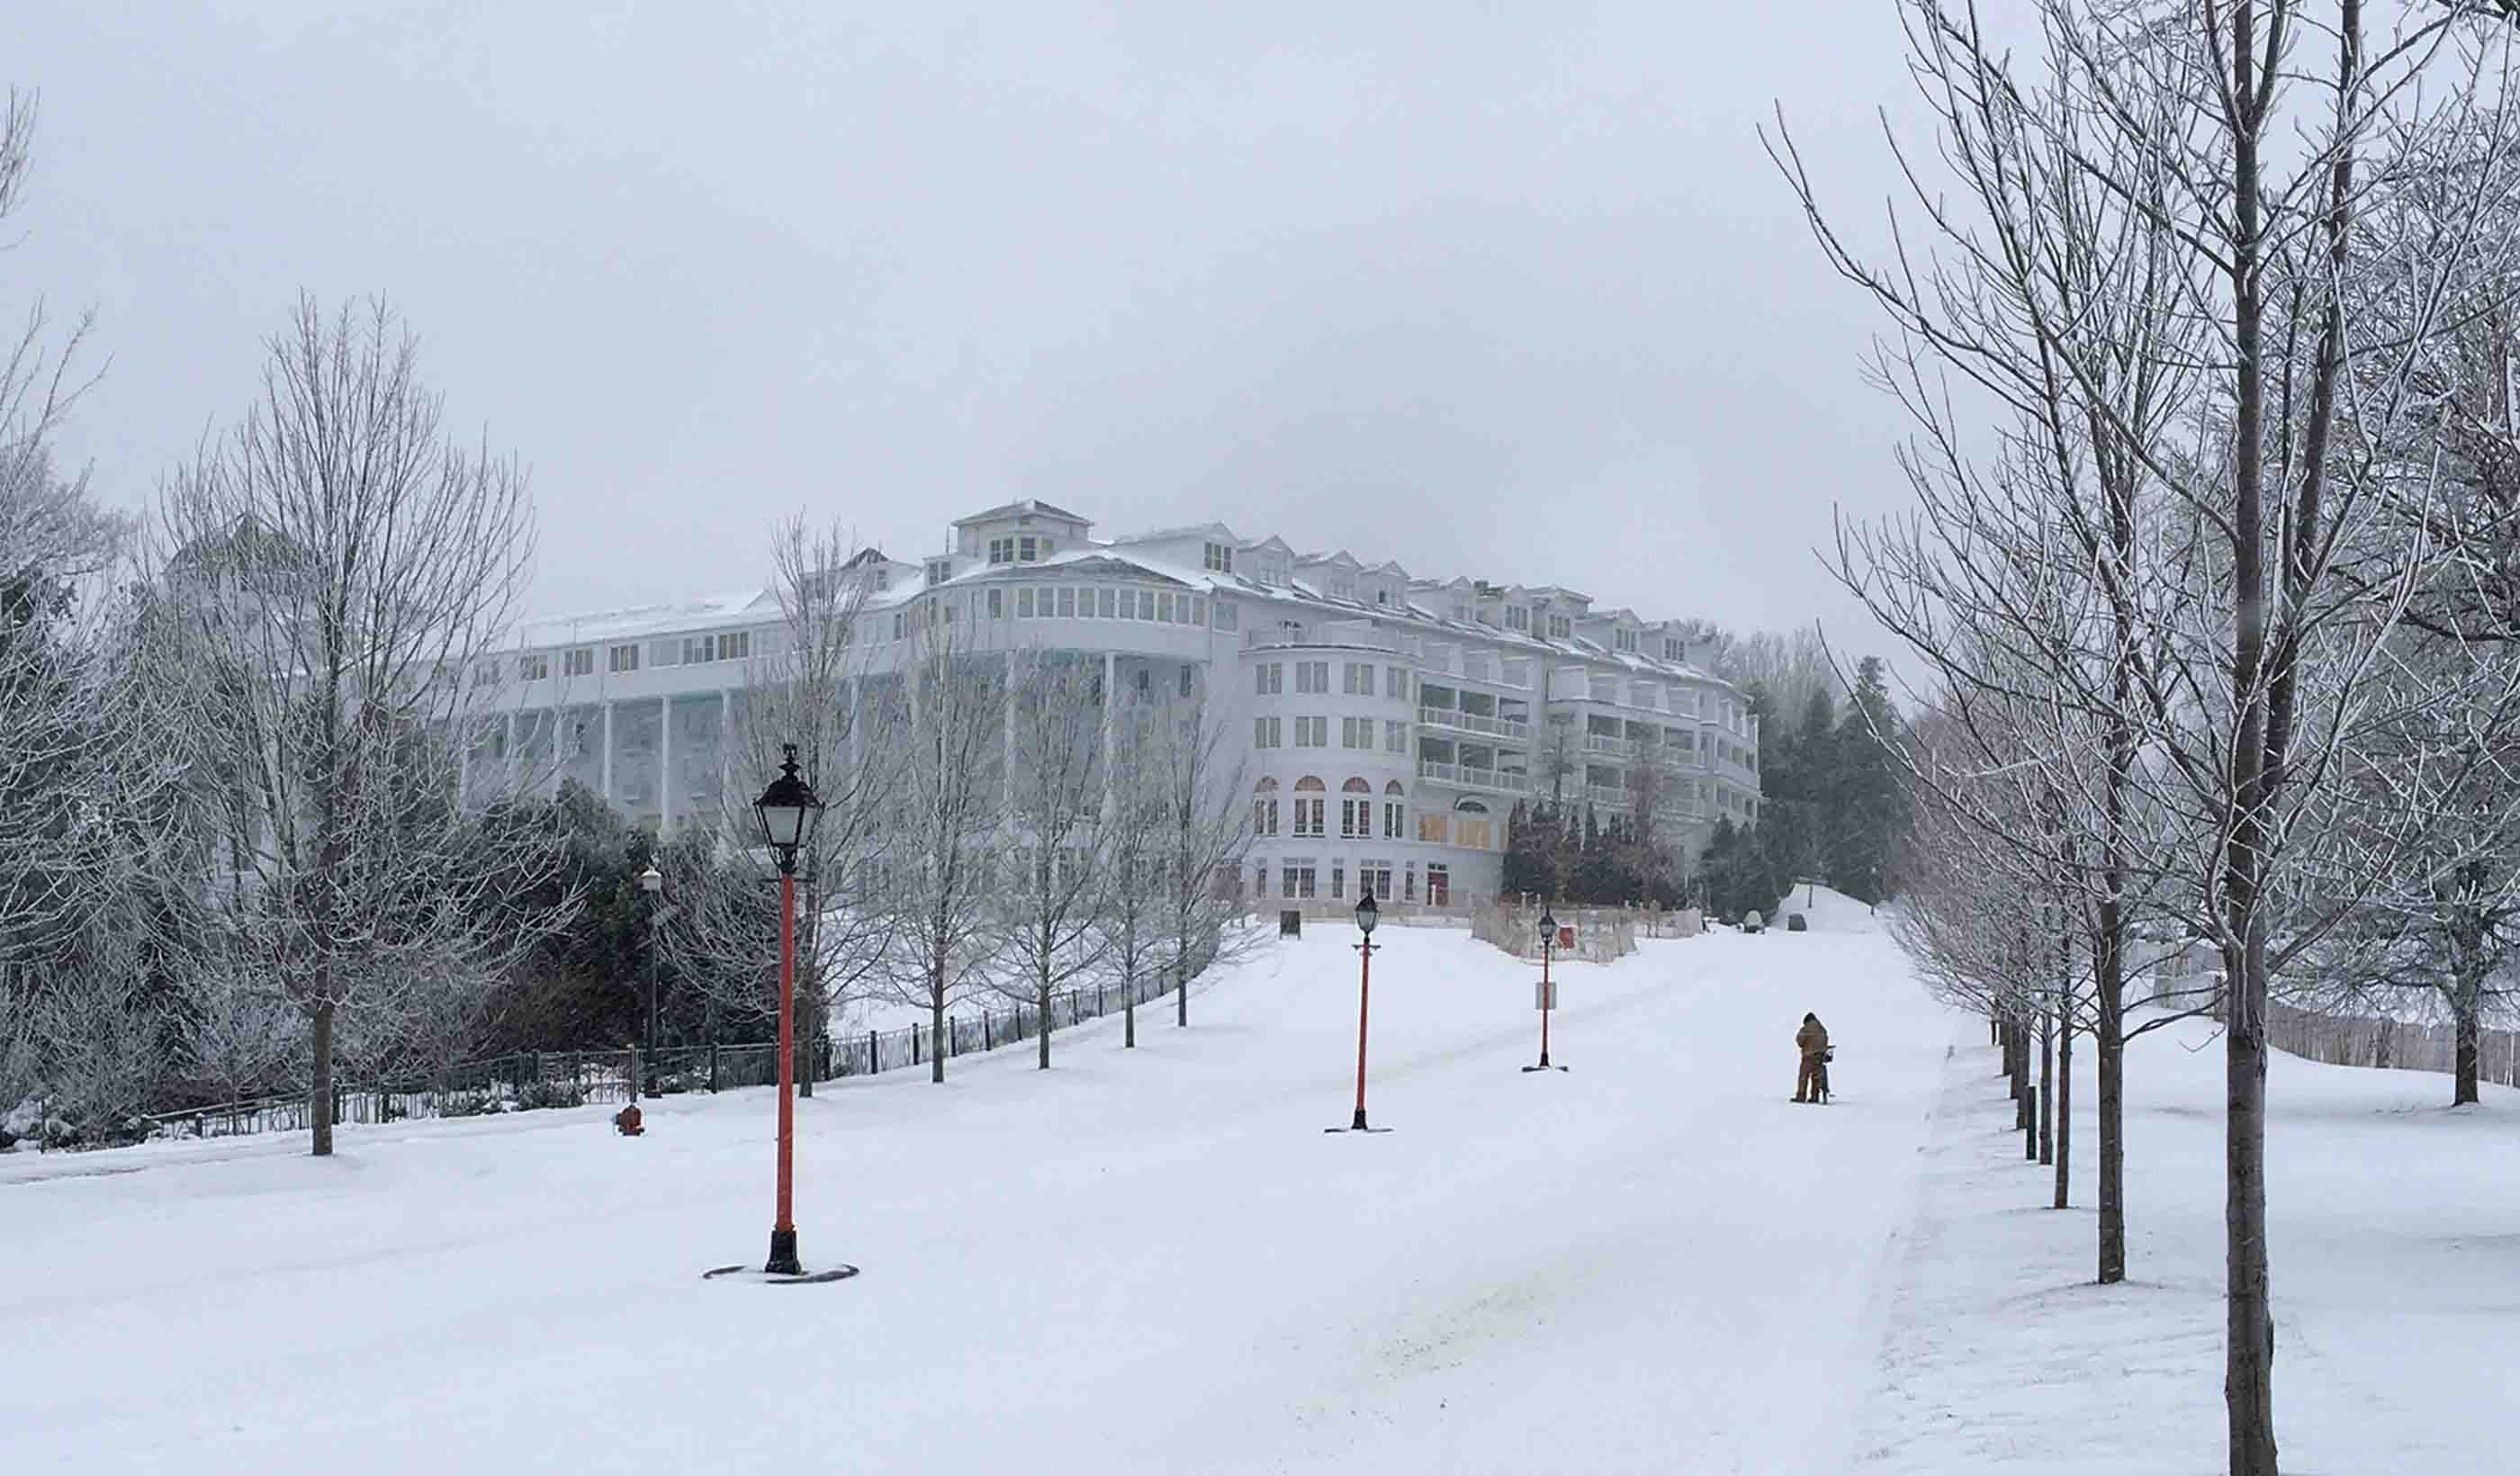 The charms and challenges of working on Mackinac Island include winter and water